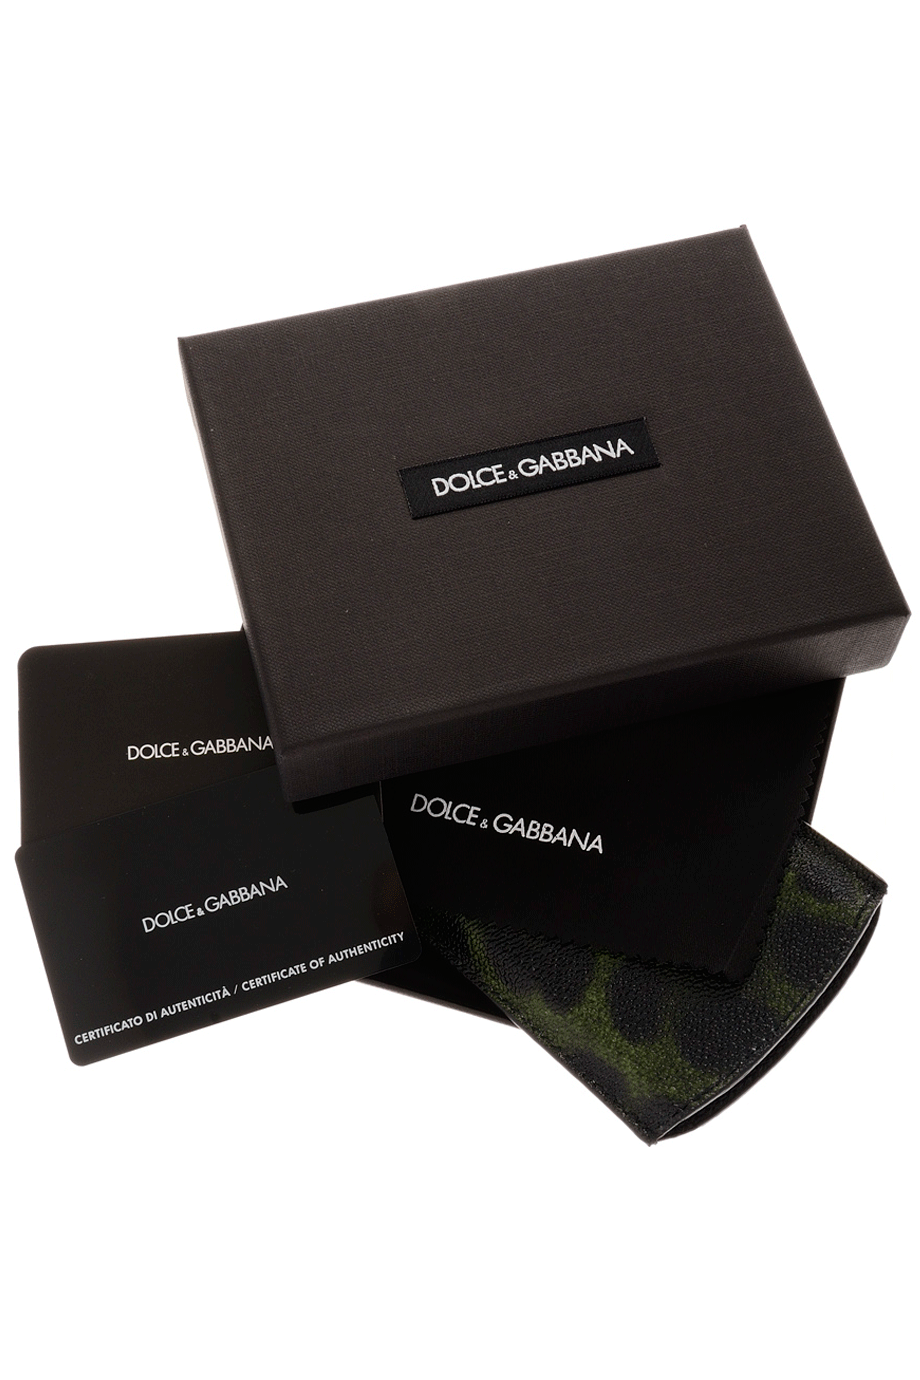 dolce and gabbana certificate of authenticity